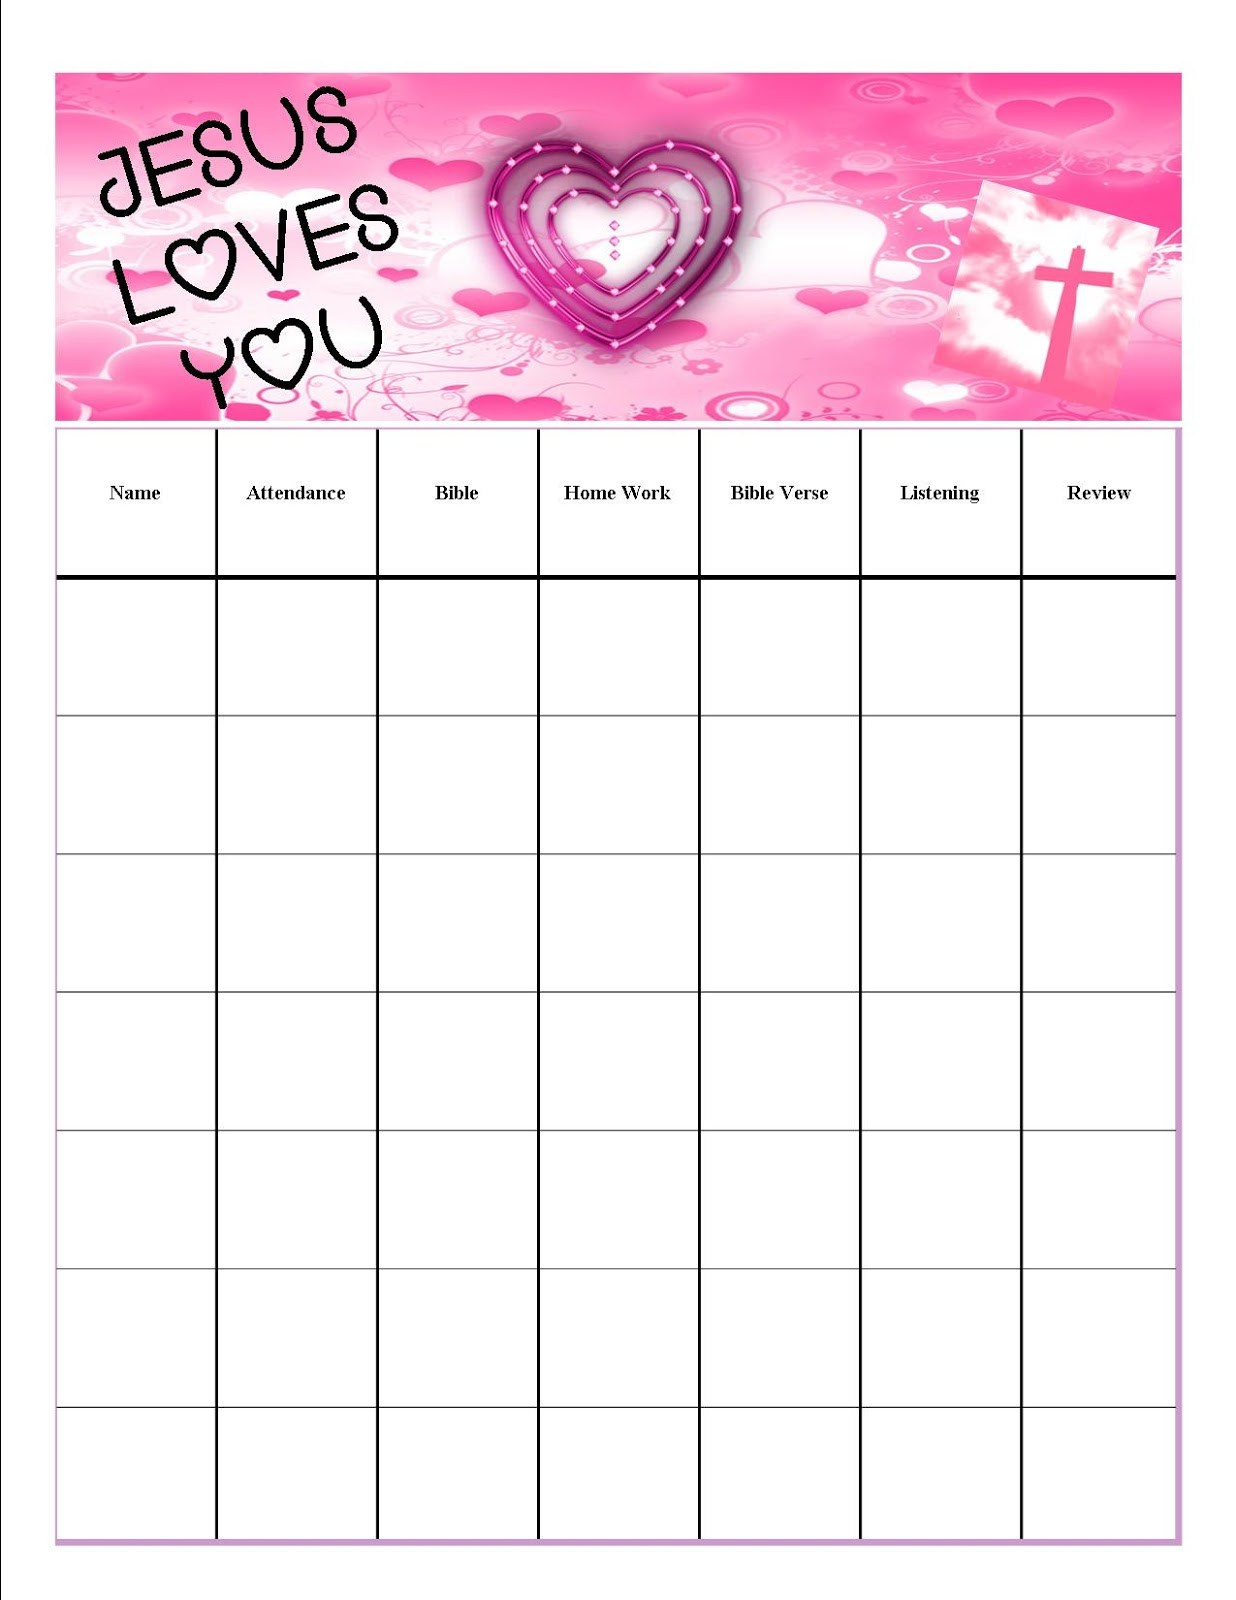 sunday-school-attendance-chart-free-printable-free-printable-images-and-photos-finder